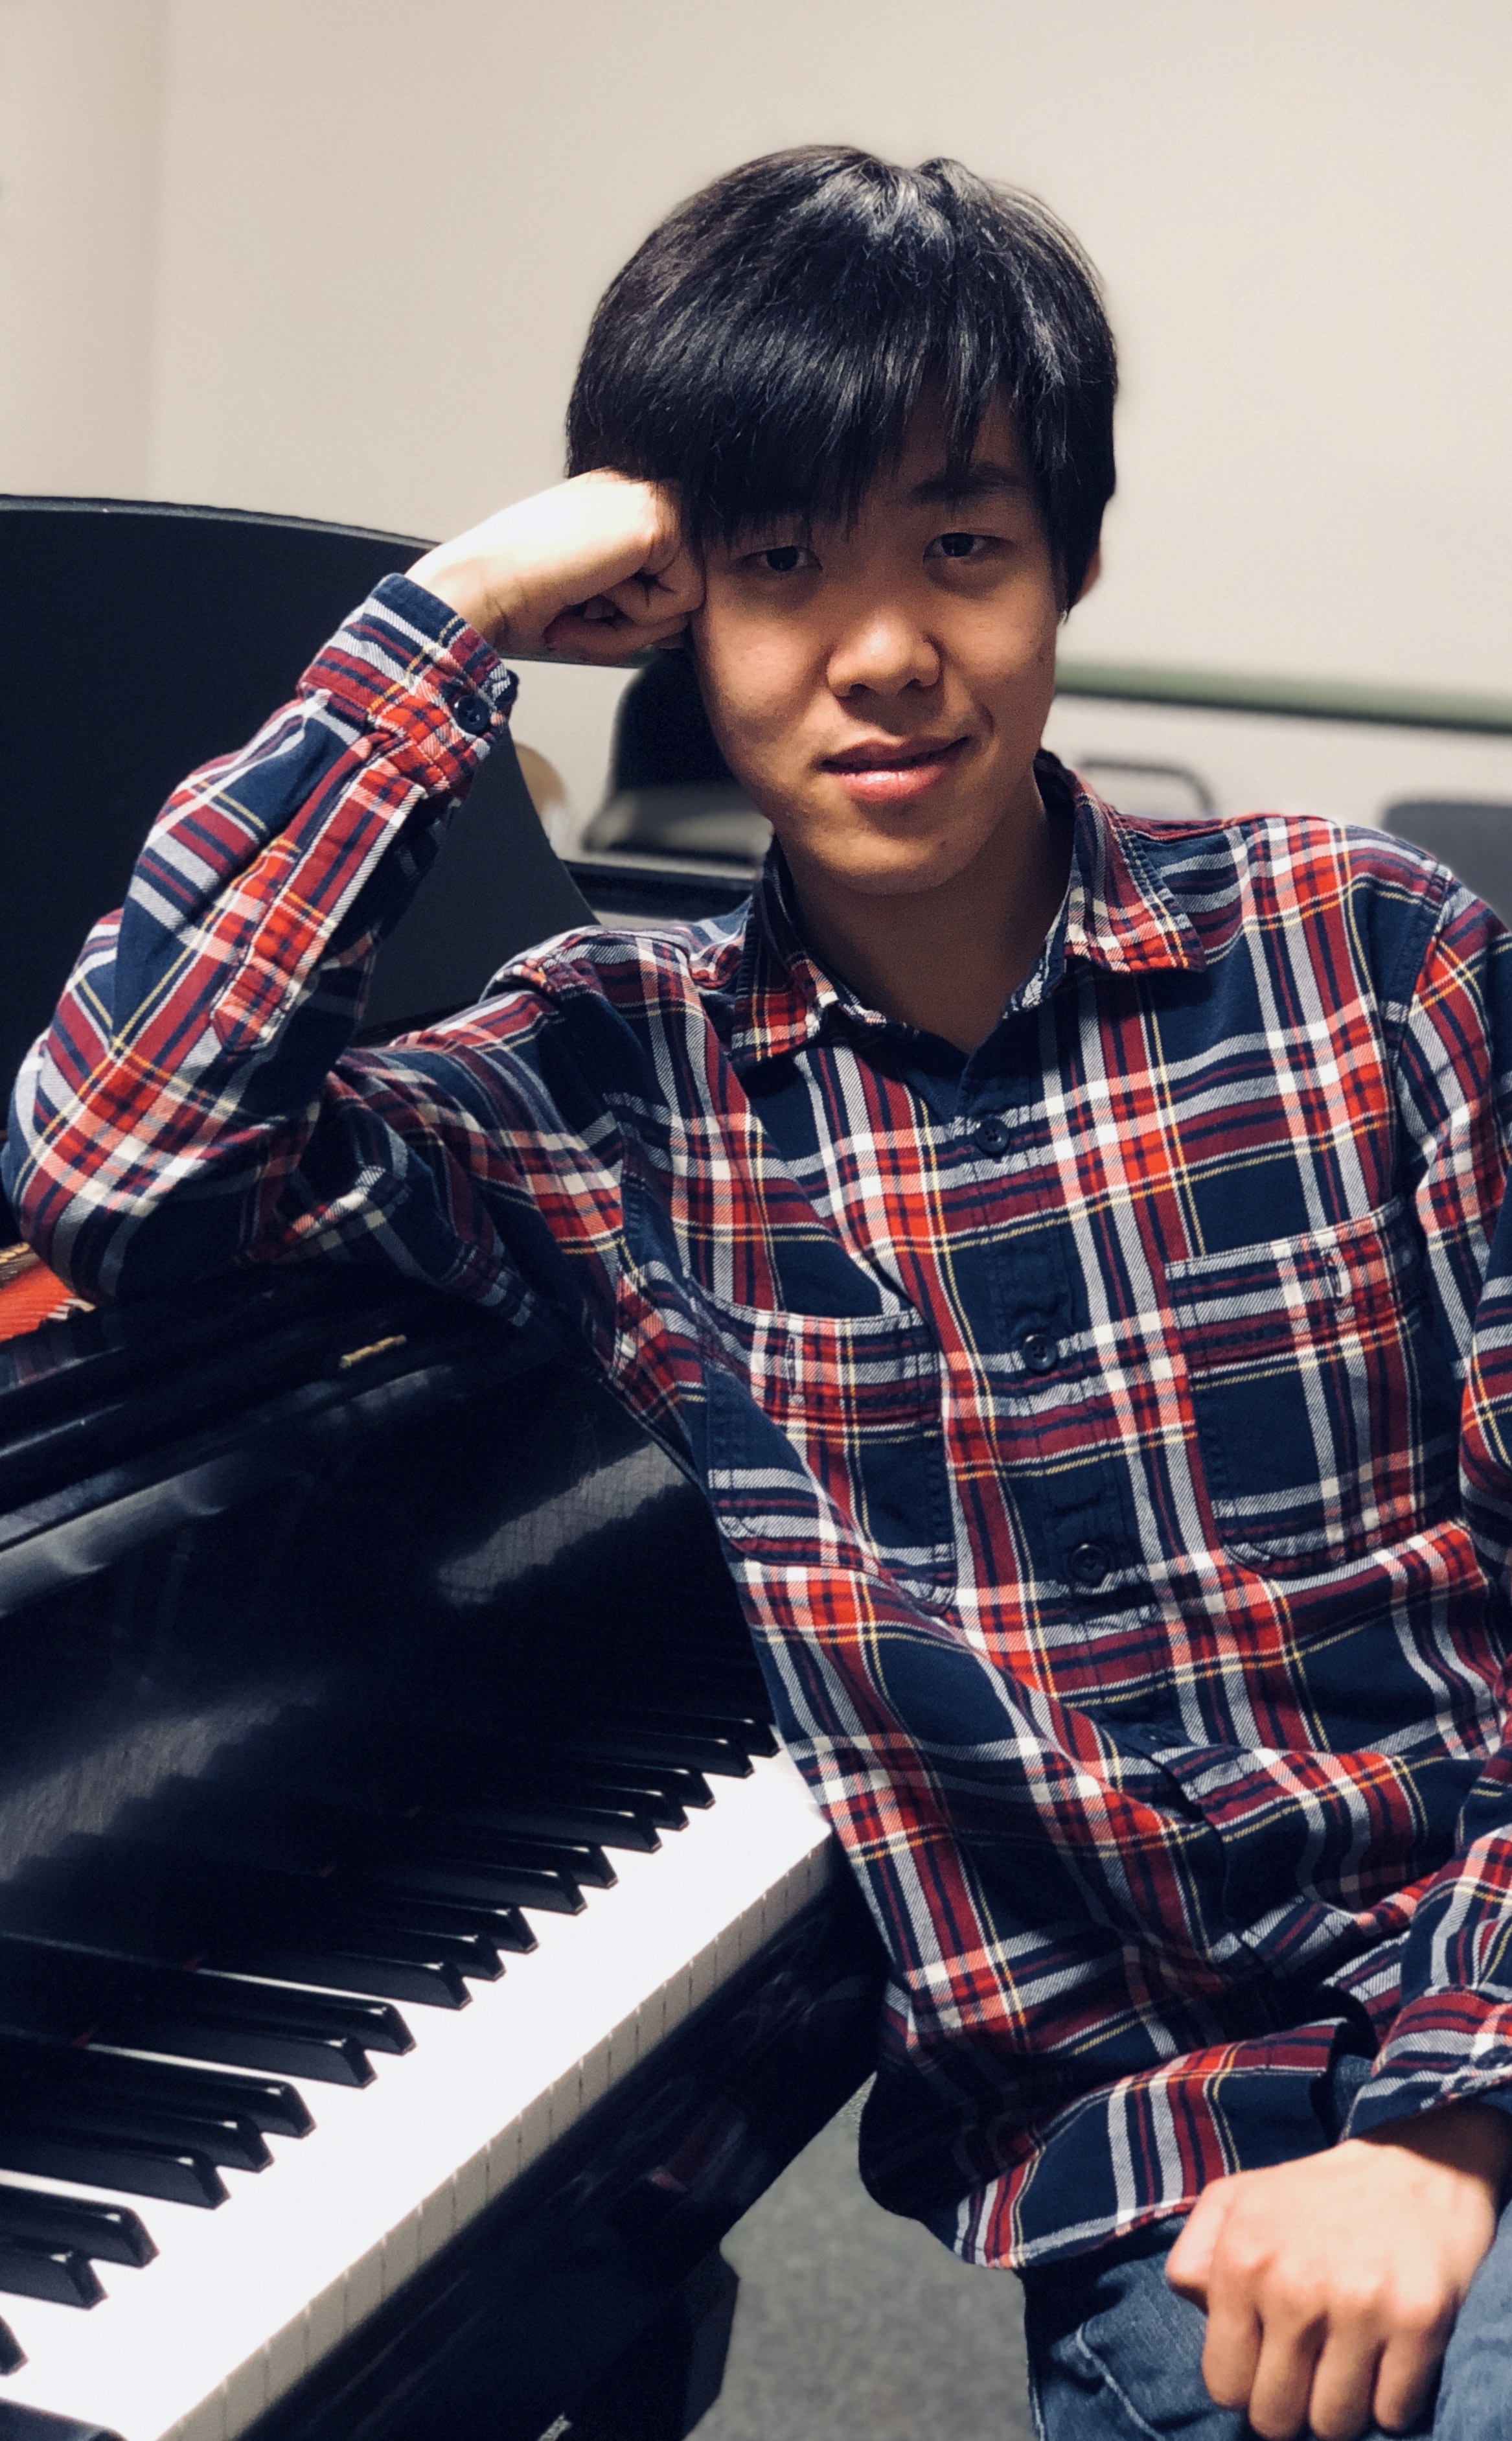 New England Conservatory's Yutong Sun sitting on a piano bench, leaning on a piano.